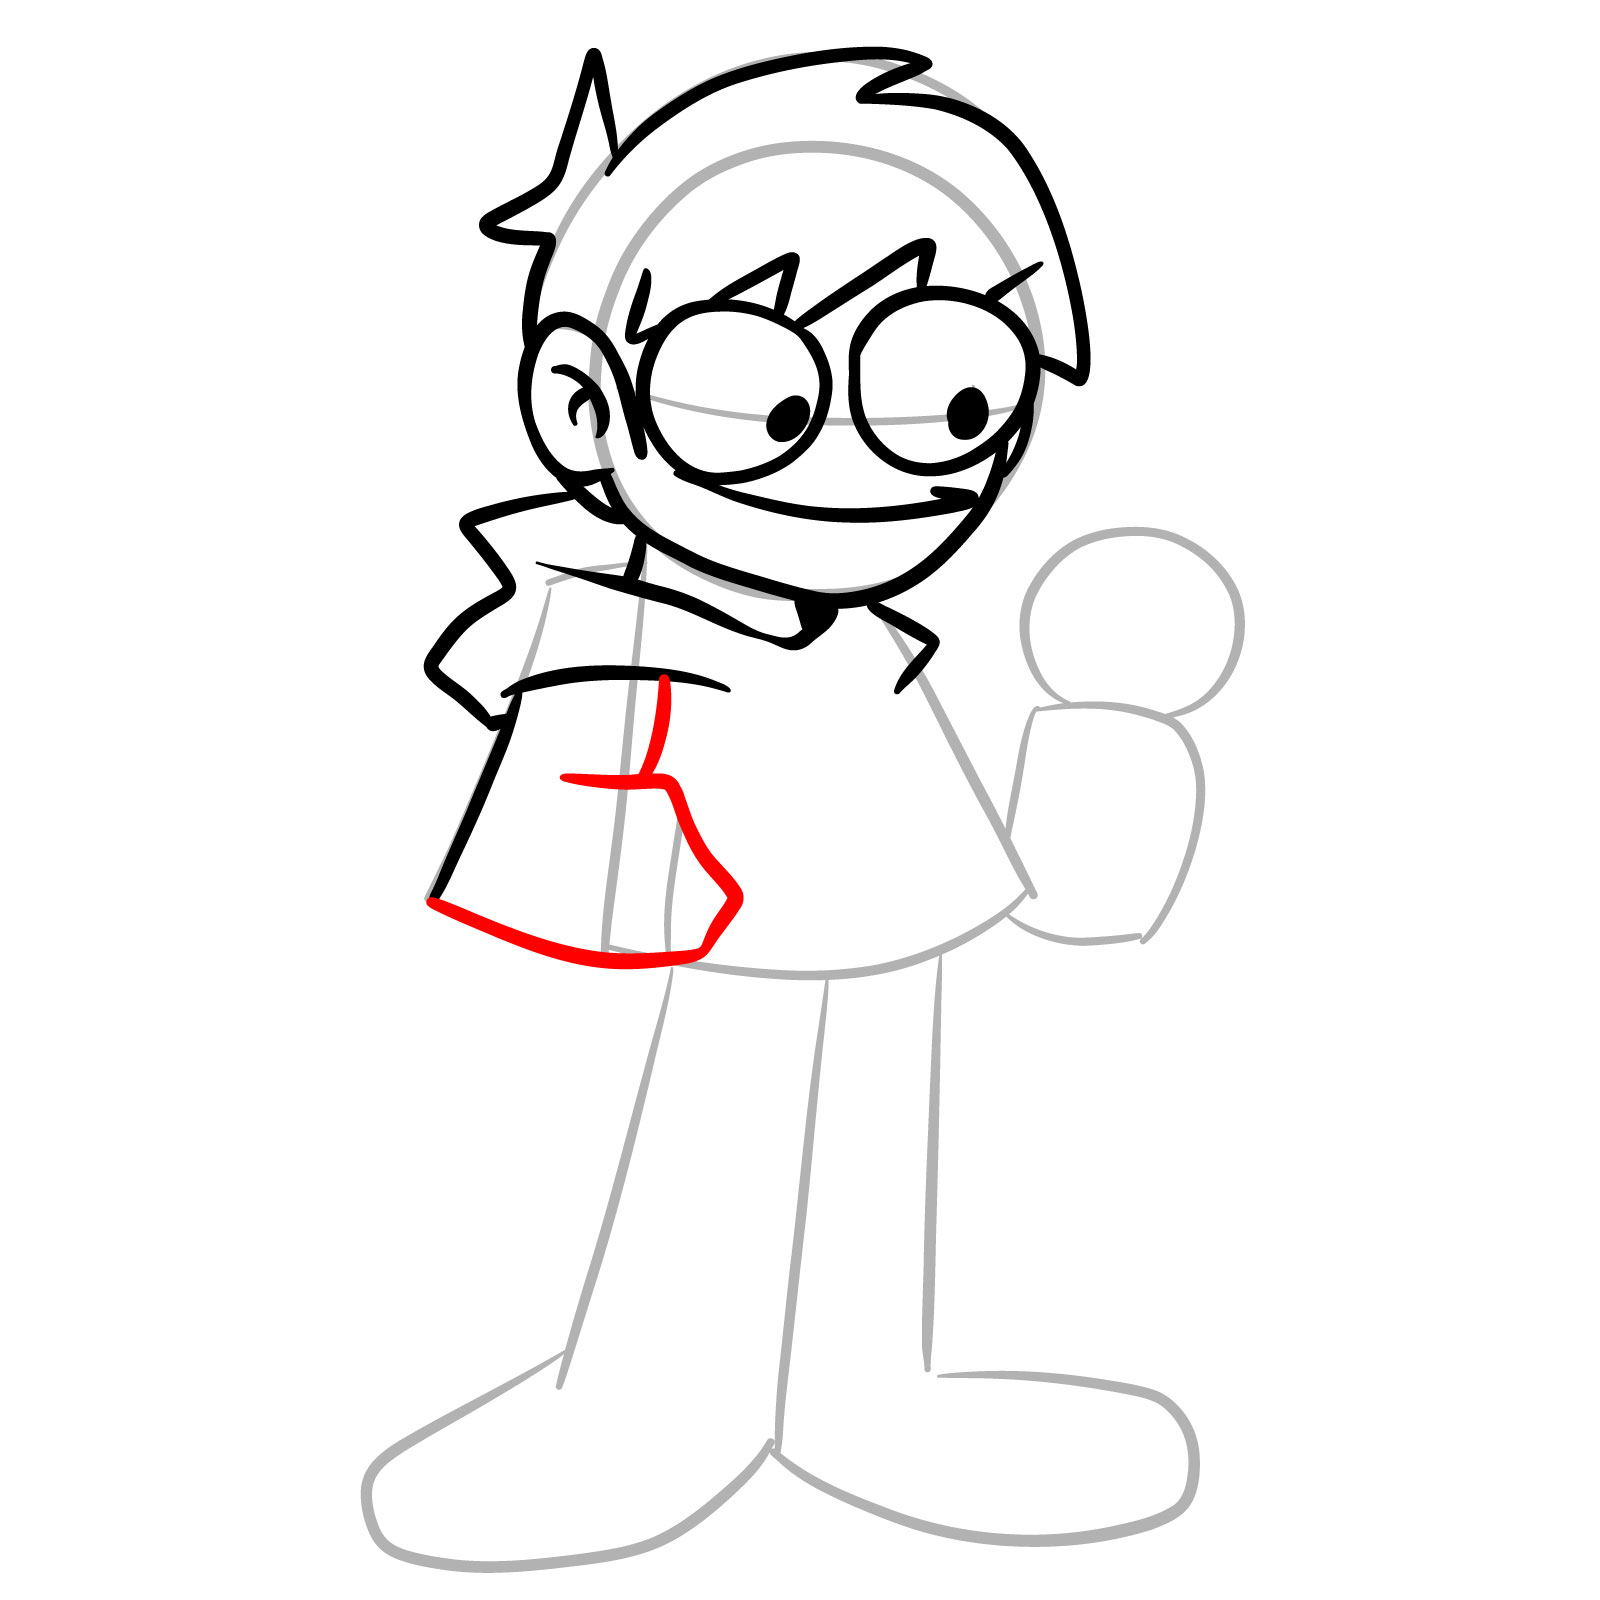 How to draw Edd from Online Vs - step 14